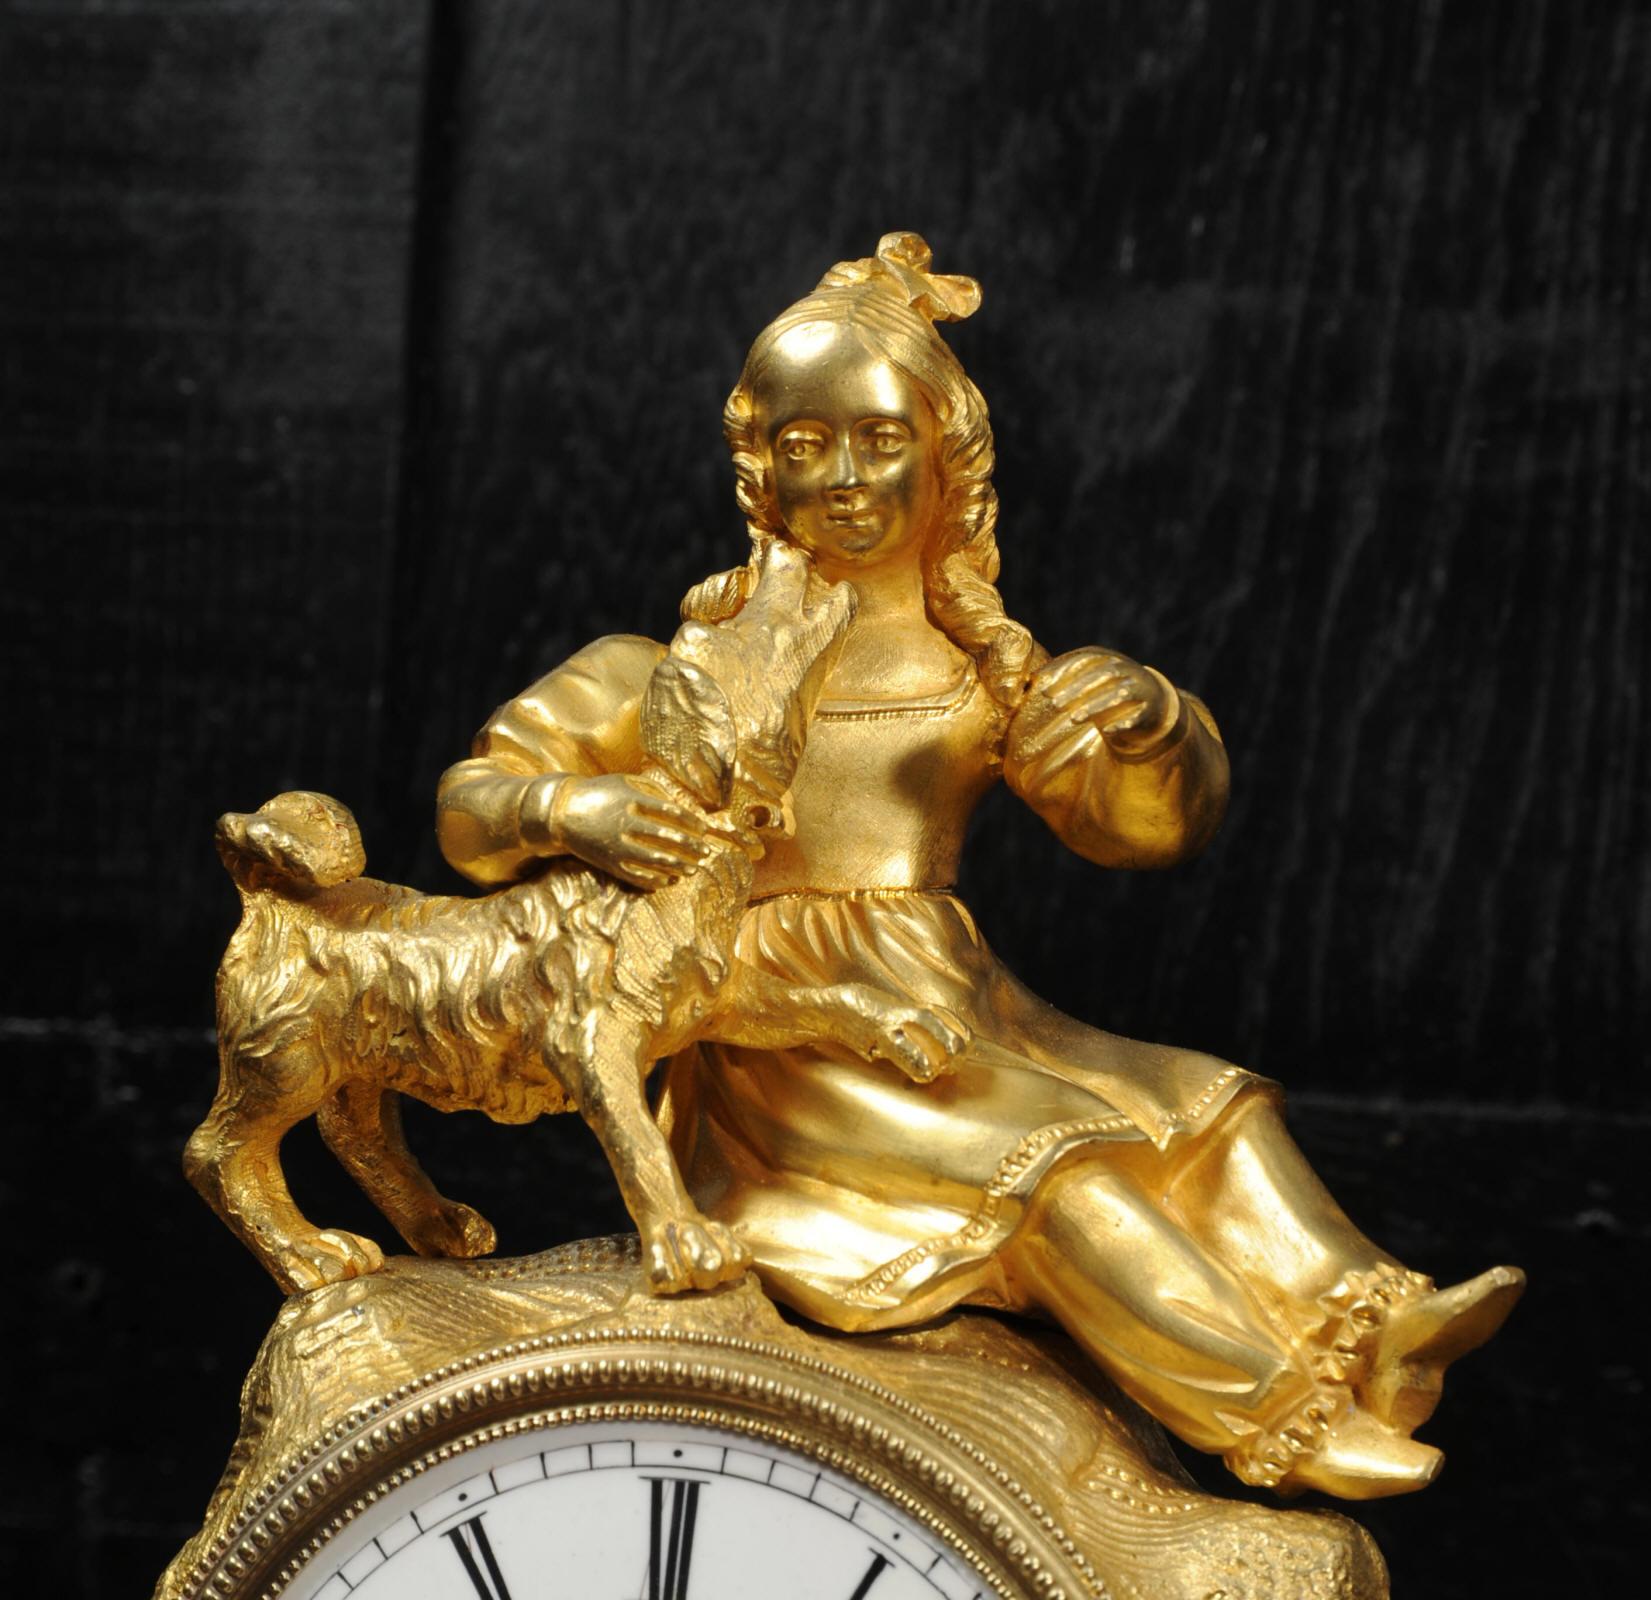 An early and stunning original antique French clock by Japy Frères, circa 1850. It features a charming figure of a girl with her favorite dog atop a naturally modelled rocky outcrop that house the clock. It is beautifully modelled in ormolu (mercury